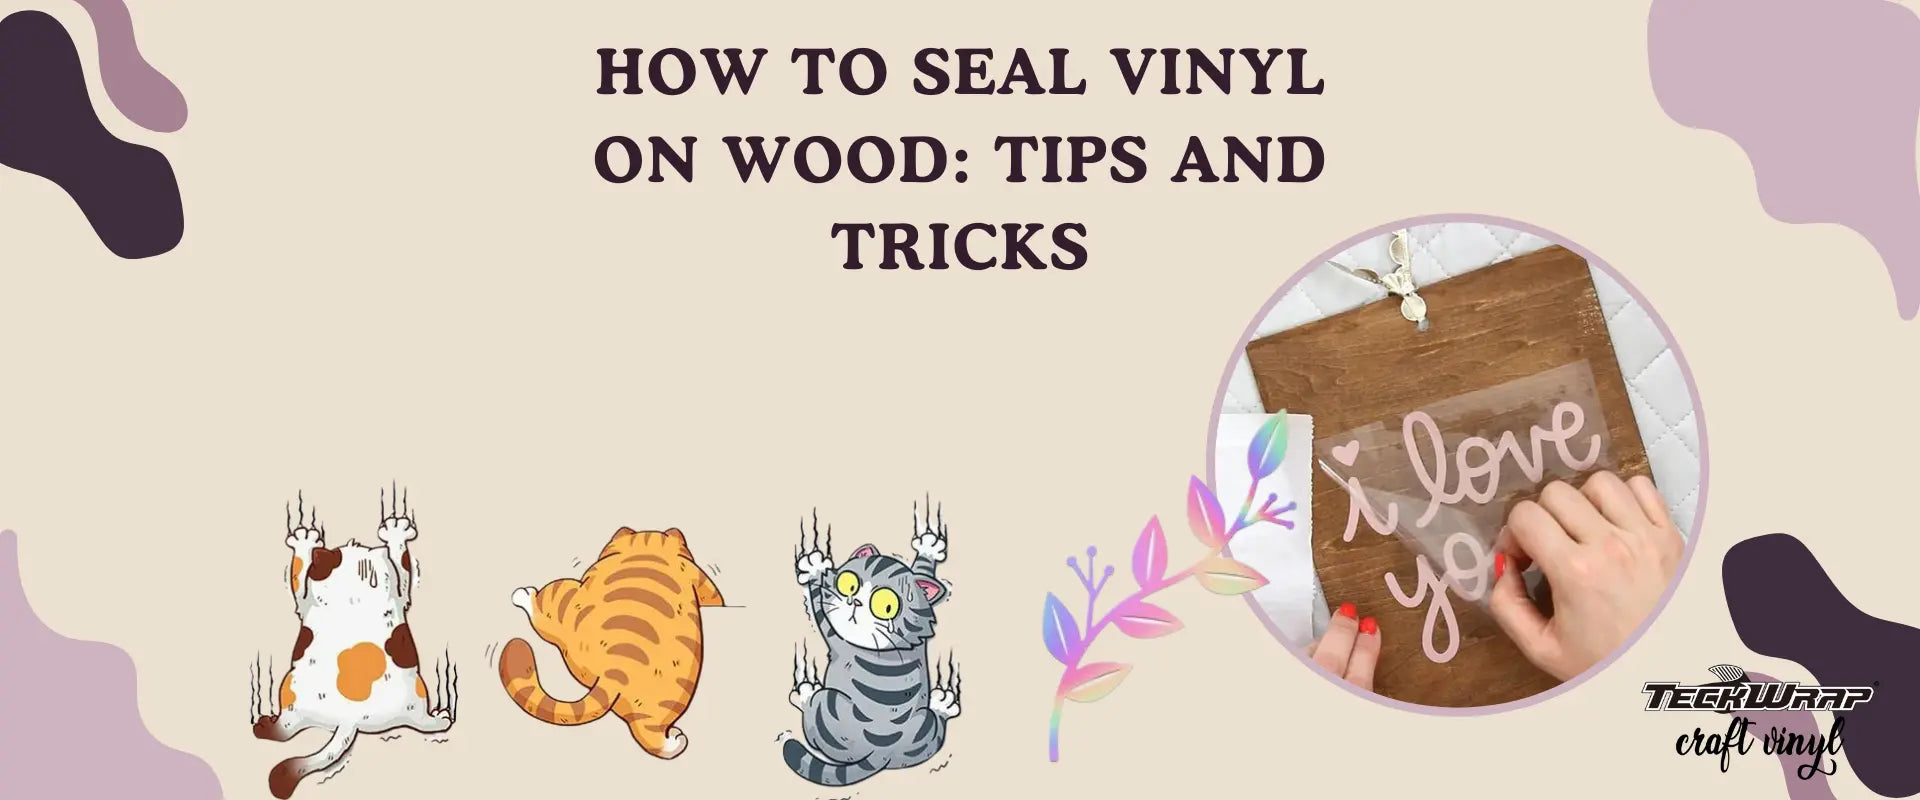 How To Seal Vinyl On Wood Tips and Tricks.webp__PID:973fc7ff-632a-4d8a-91fe-76d95628462c